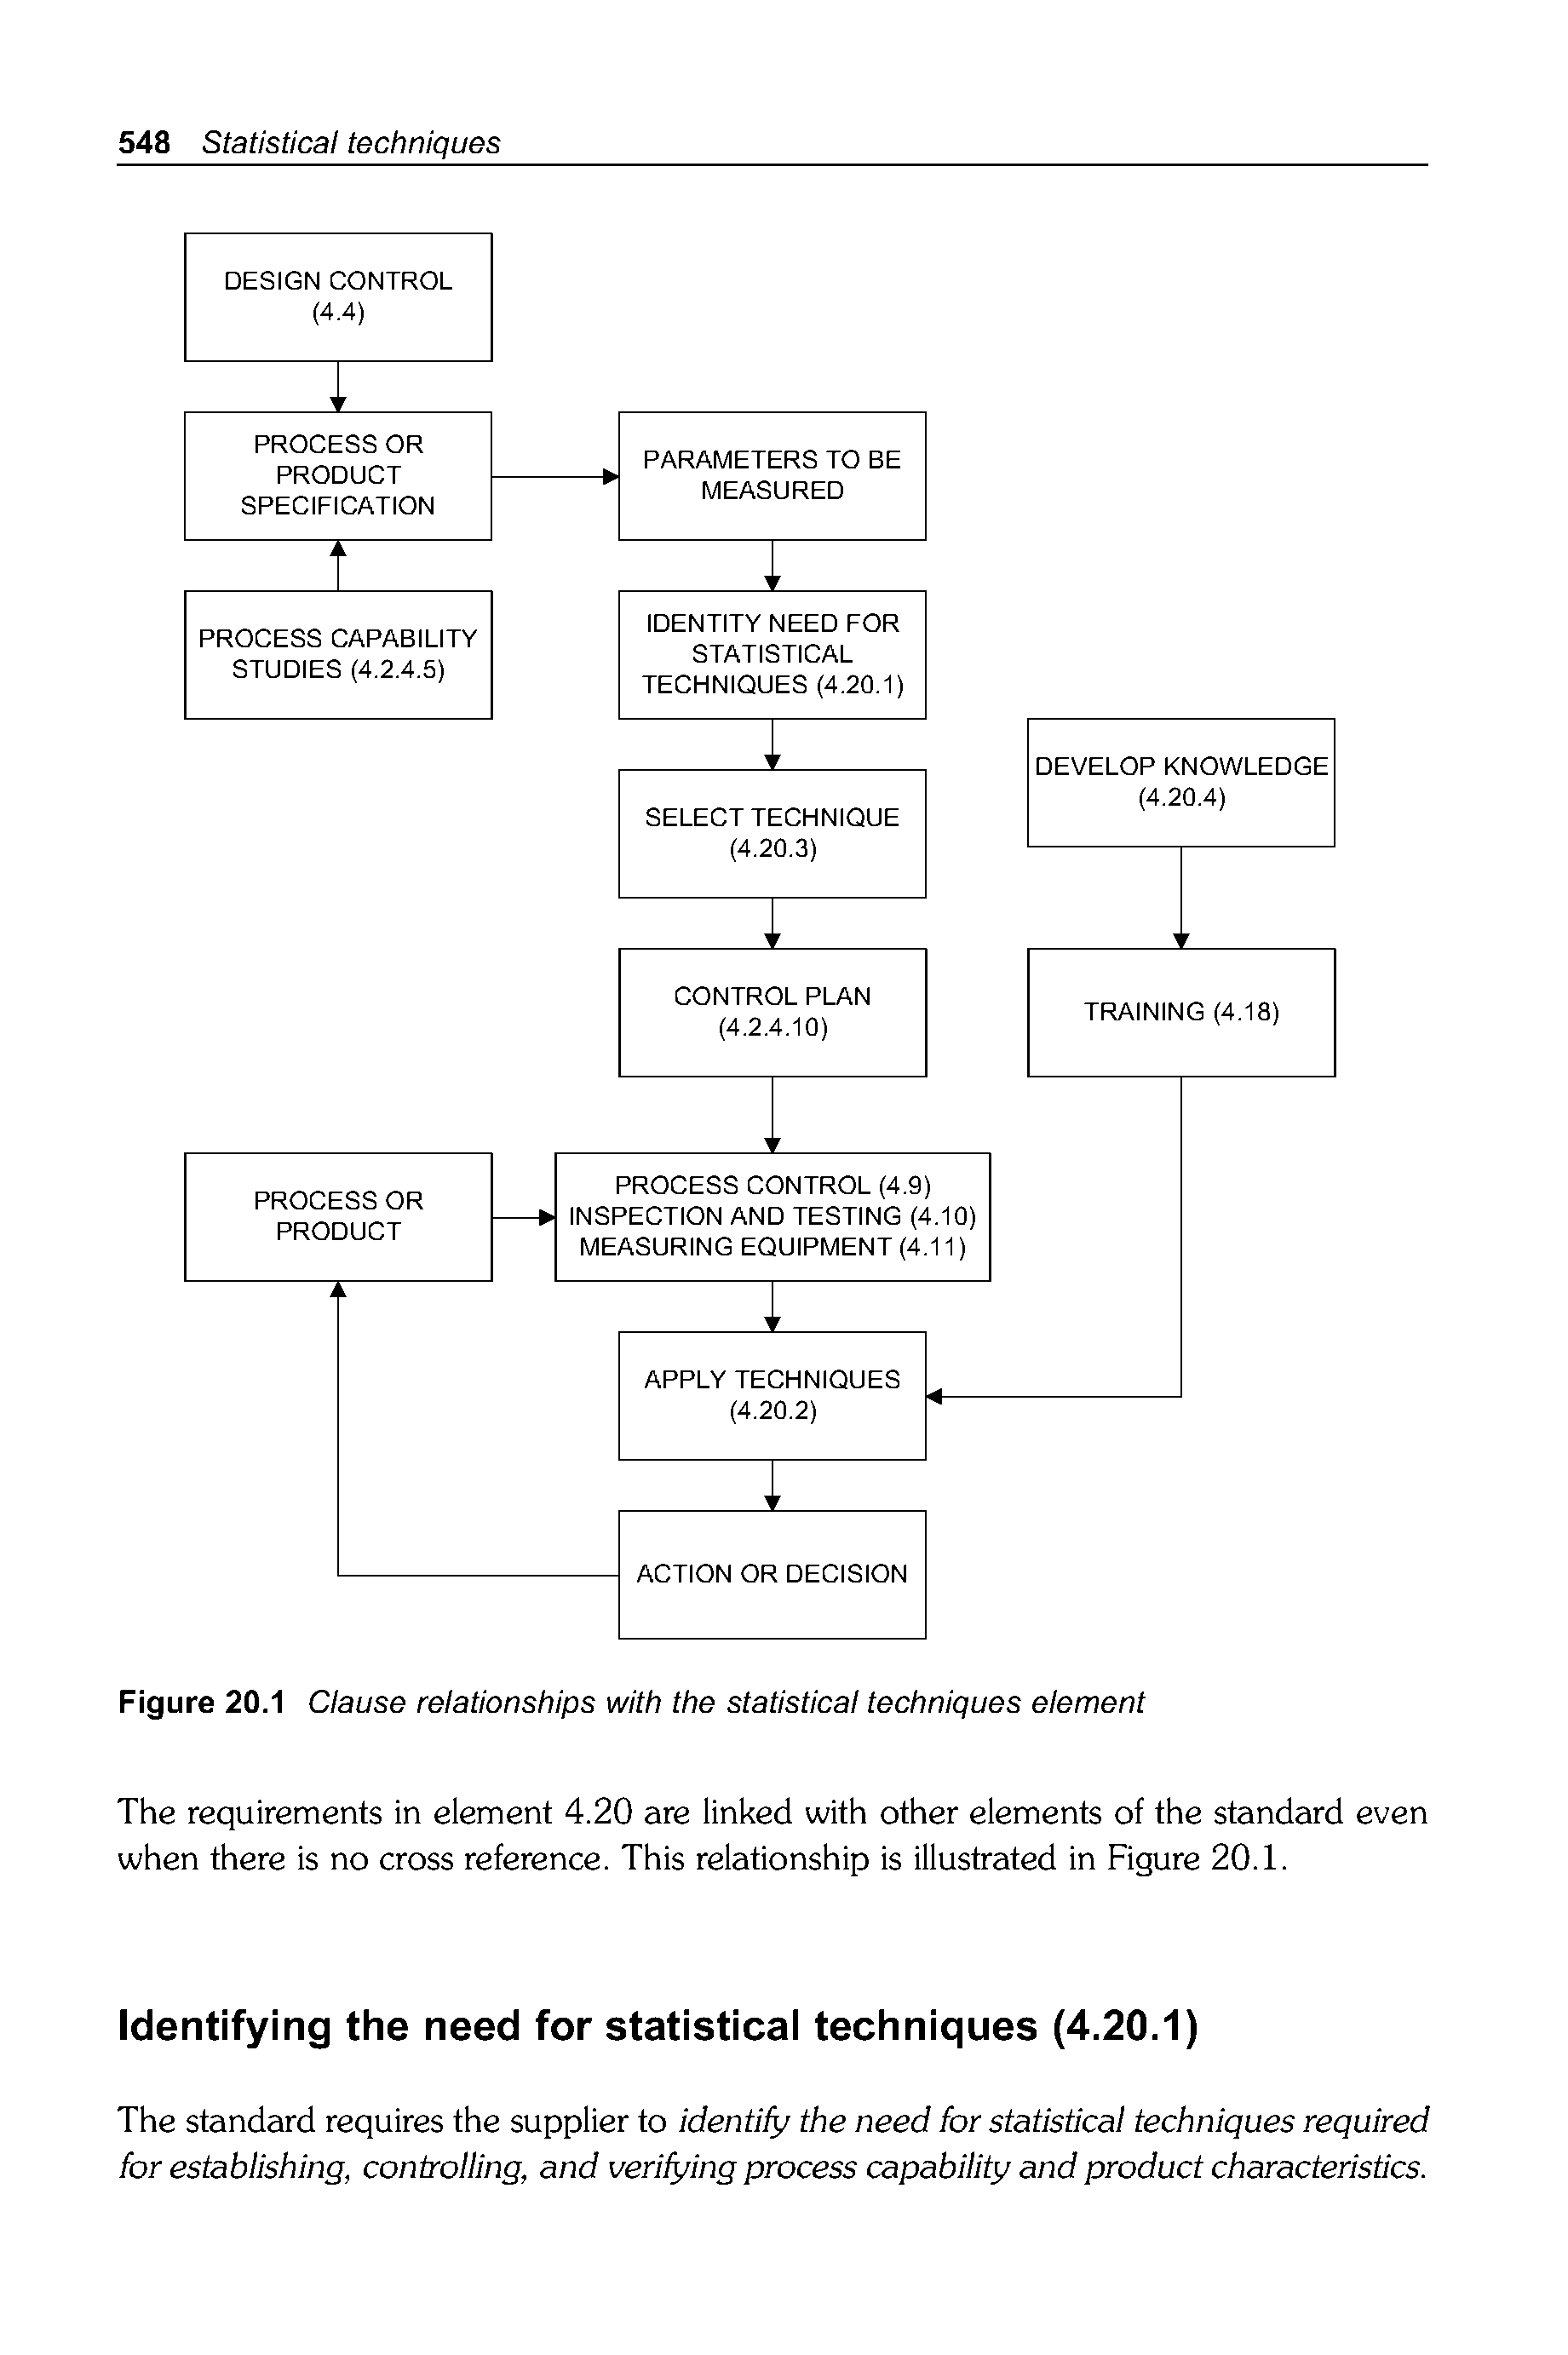 Figure 20.1 Clause relationships with the statistical techniques element...